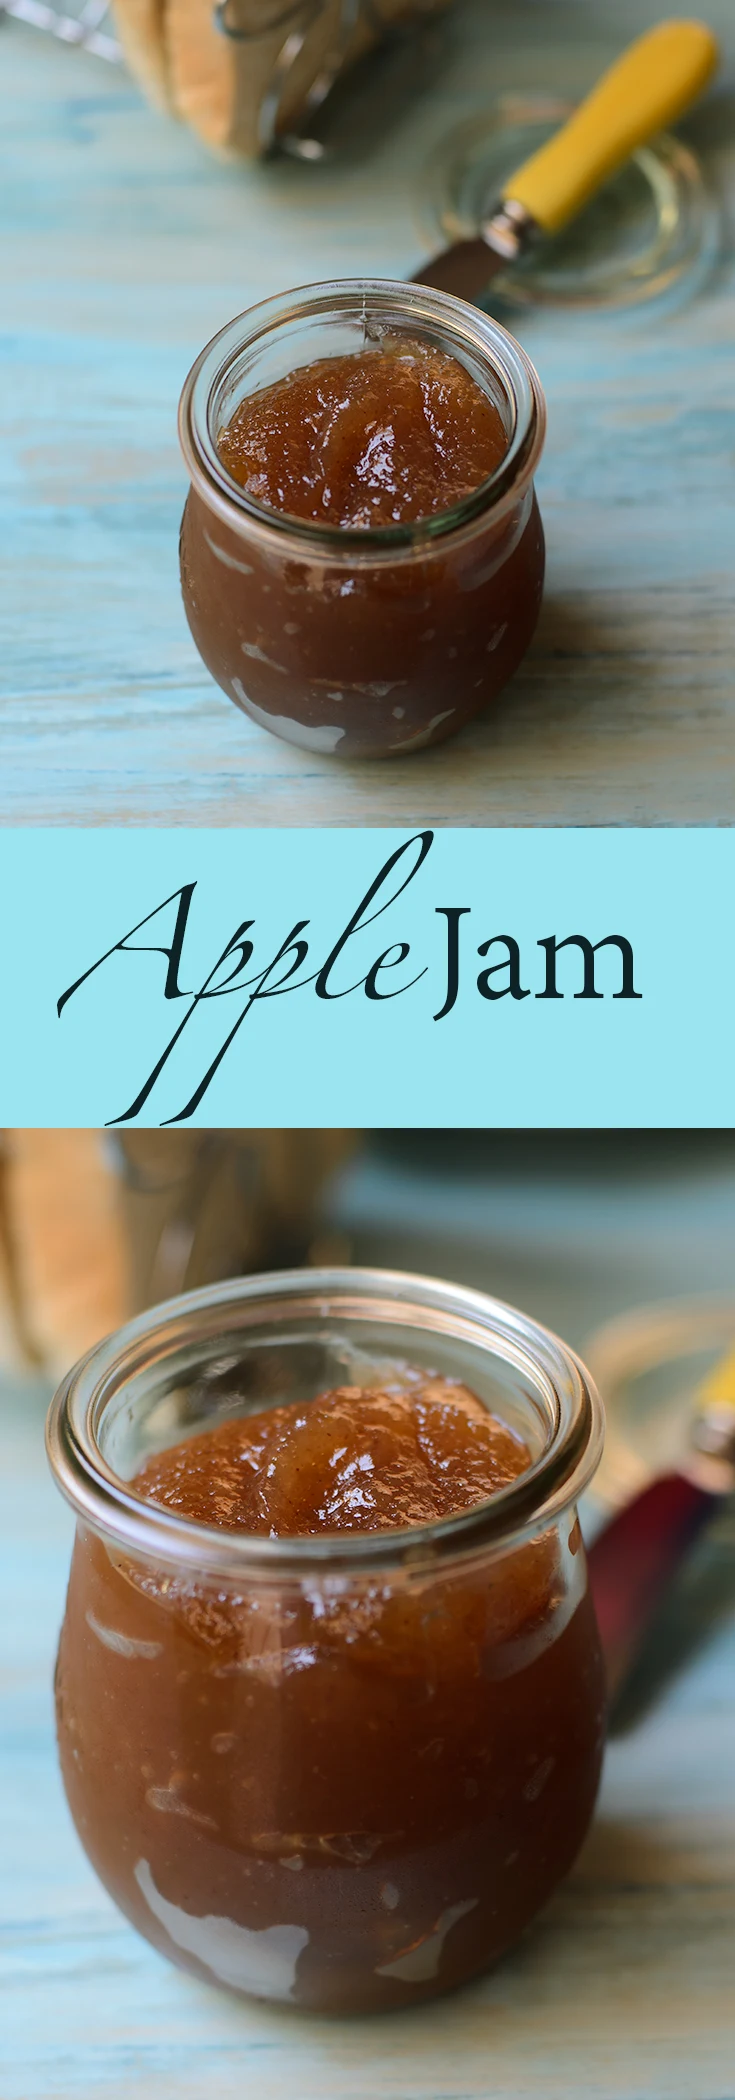 Homemade apple jam recipe. Apple jam or also known as apple butter, marvellous to serve with scones or just spread on buttered toast.